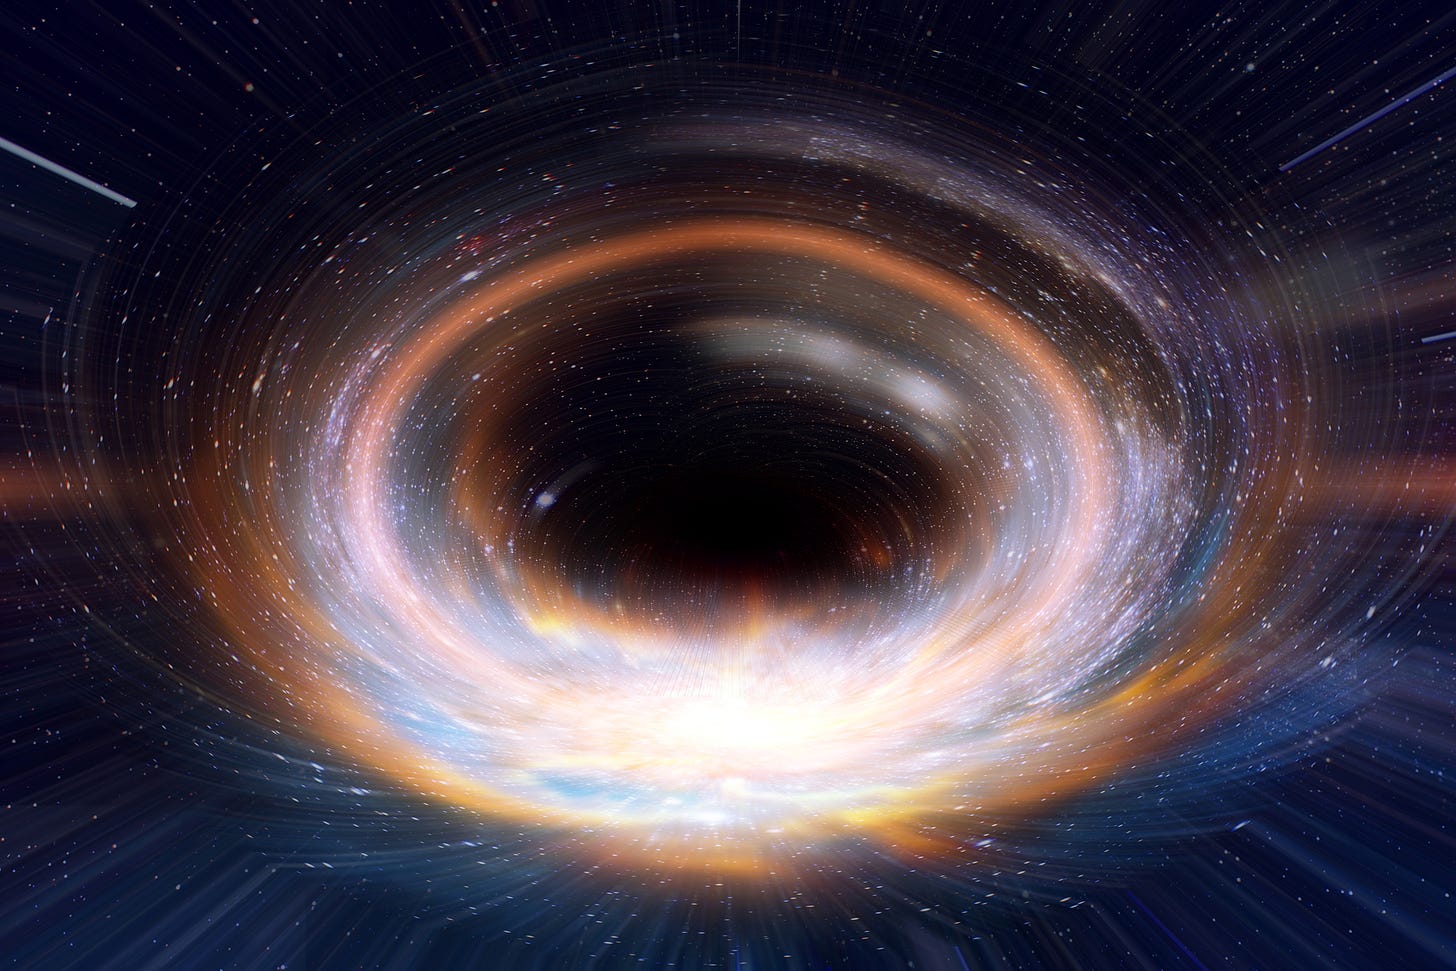 Do wormholes really exist? Scientists hatch a plan to find out.